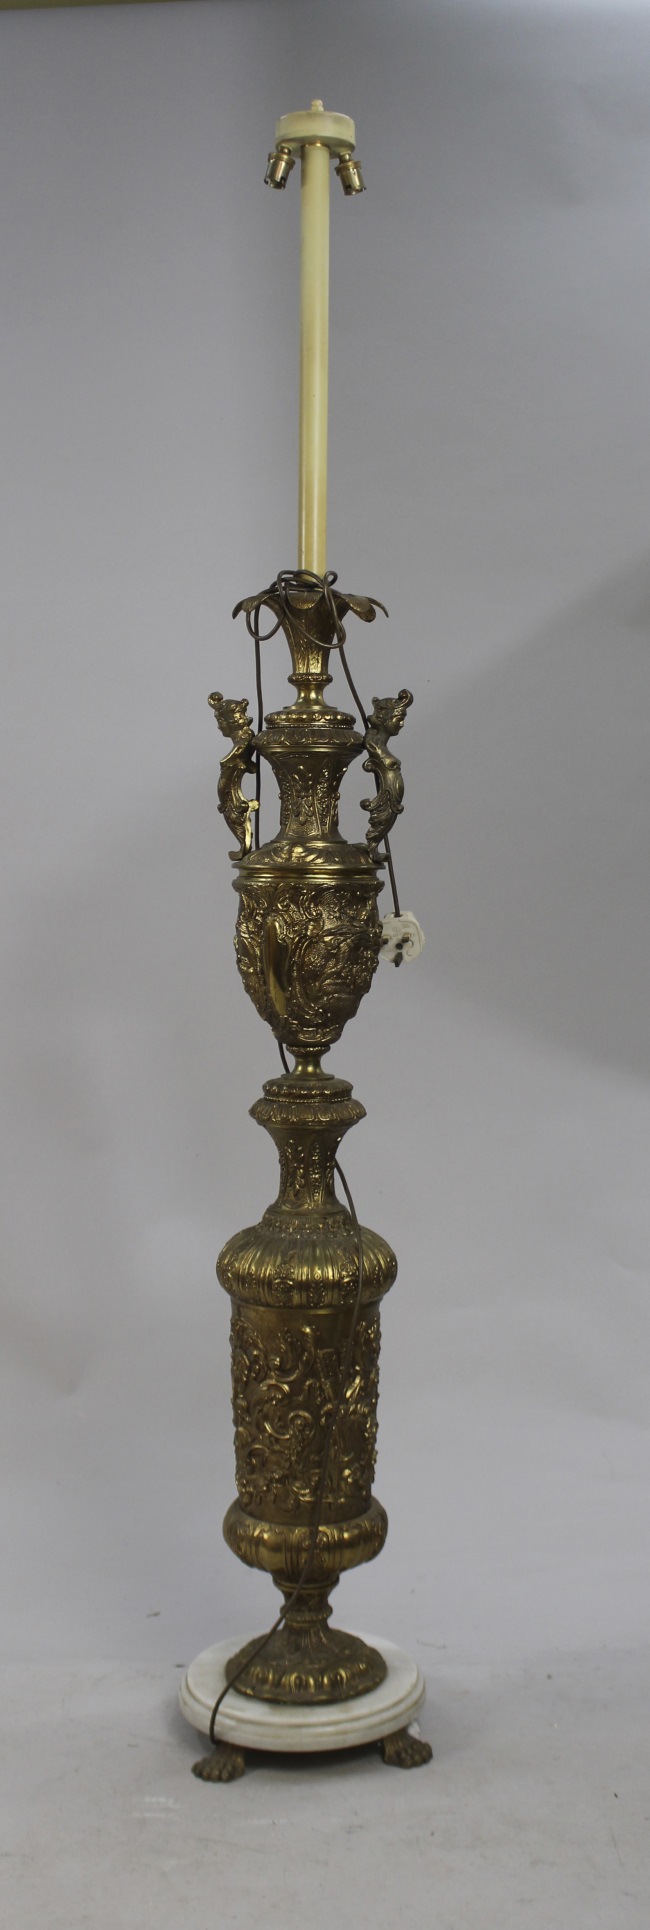 Ornate Brass & Marble Standard Lamp - Image 2 of 4